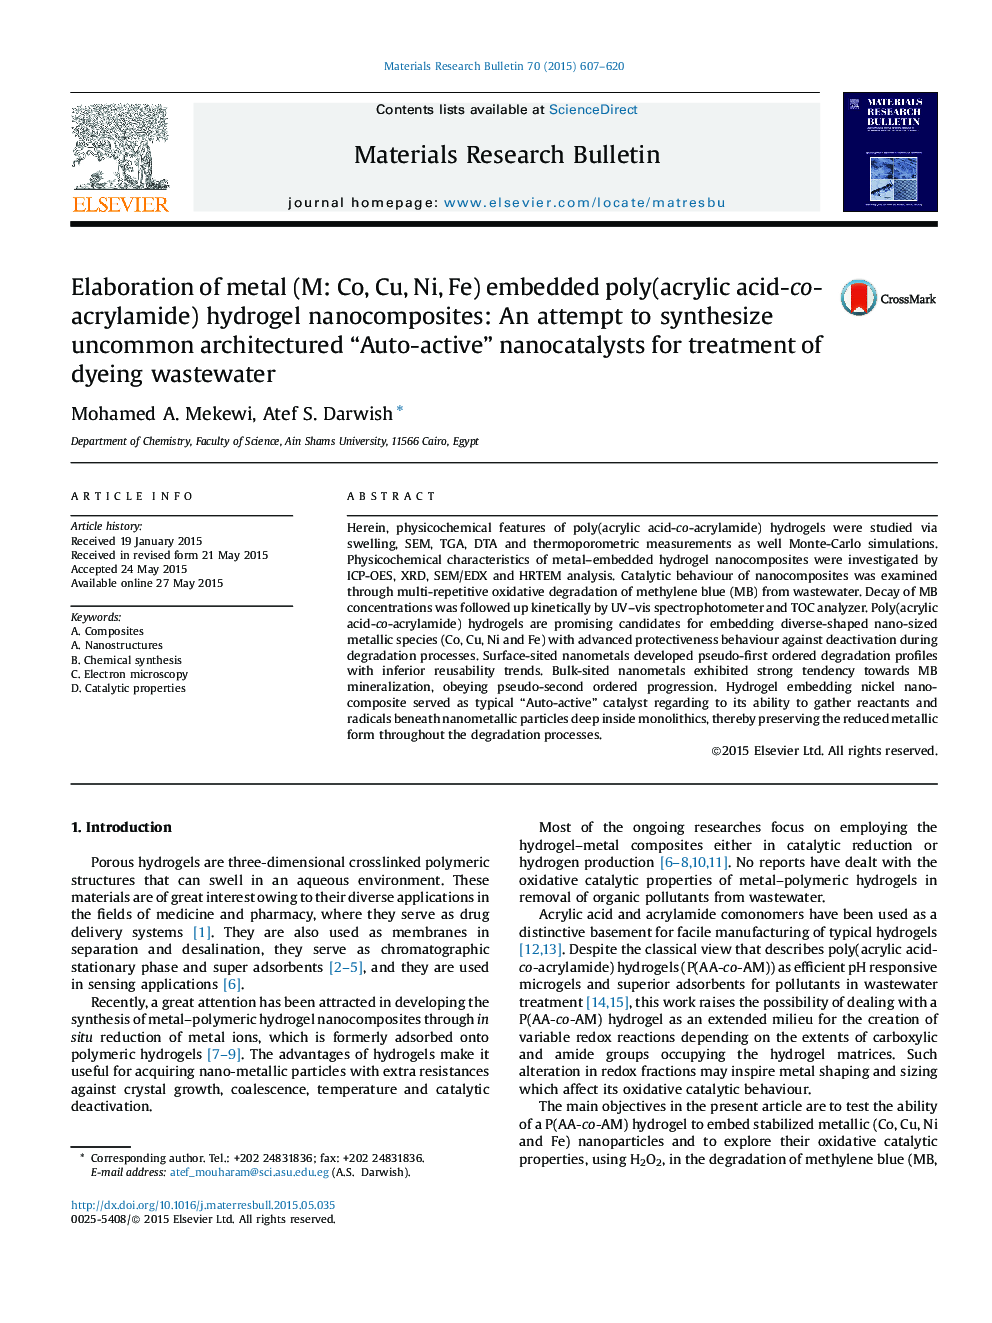 Elaboration of metal (M: Co, Cu, Ni, Fe) embedded poly(acrylic acid-co-acrylamide) hydrogel nanocomposites: An attempt to synthesize uncommon architectured “Auto-active” nanocatalysts for treatment of dyeing wastewater